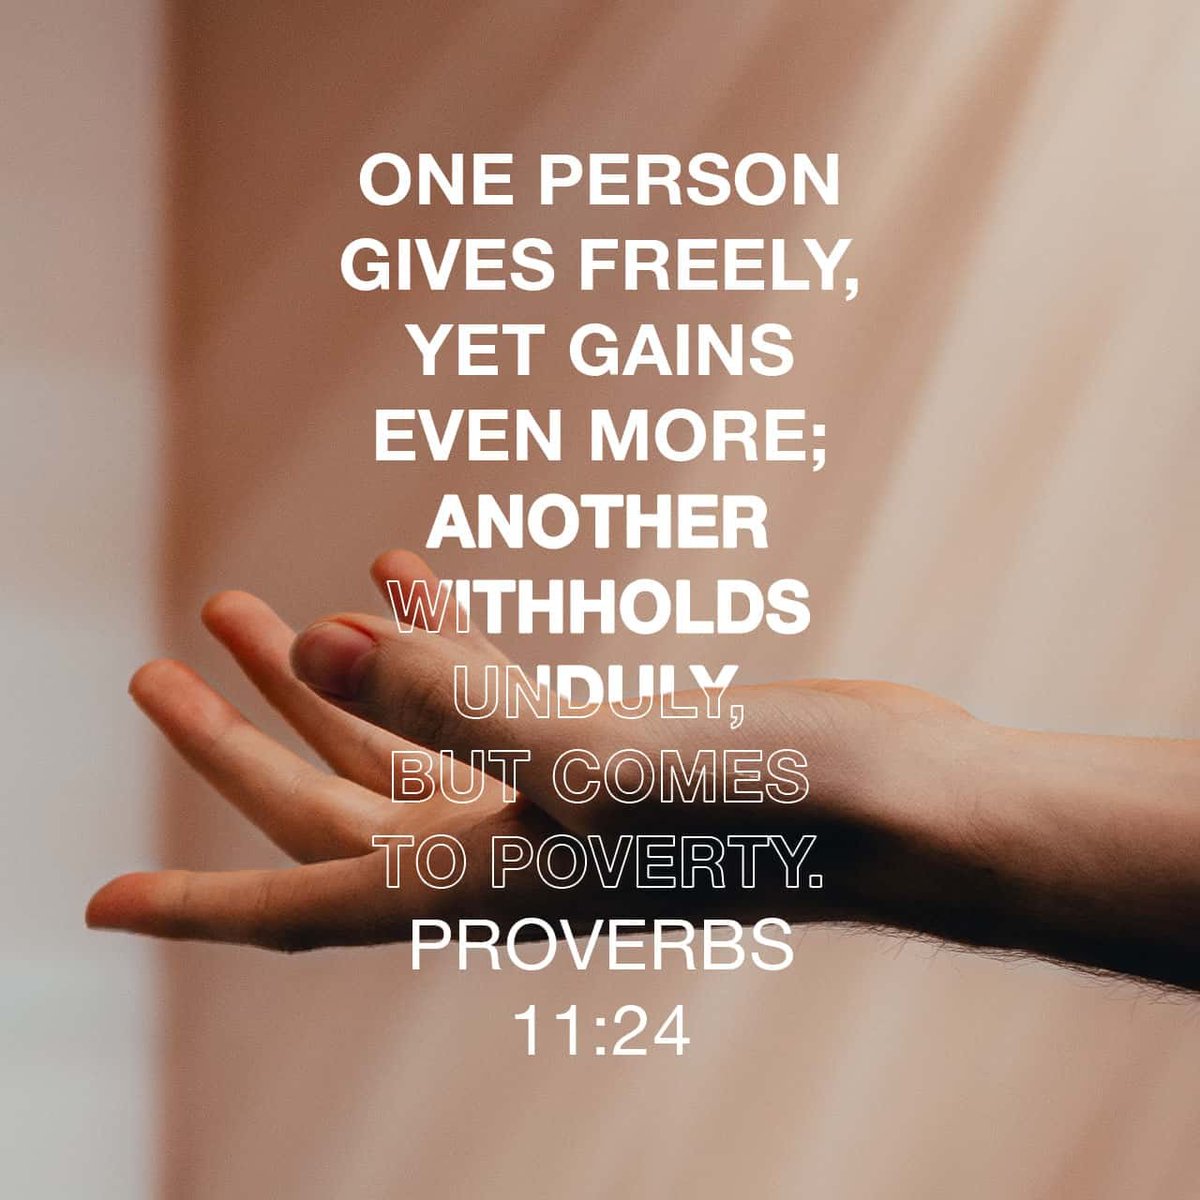 Proverbs 11:24 NASB There is one who scatters, and yet increases all the more, and there is one who withholds what is justly due, and yet it results only in want. #dailybread #dailyverse #scripture #bibleverse #bible #jesus